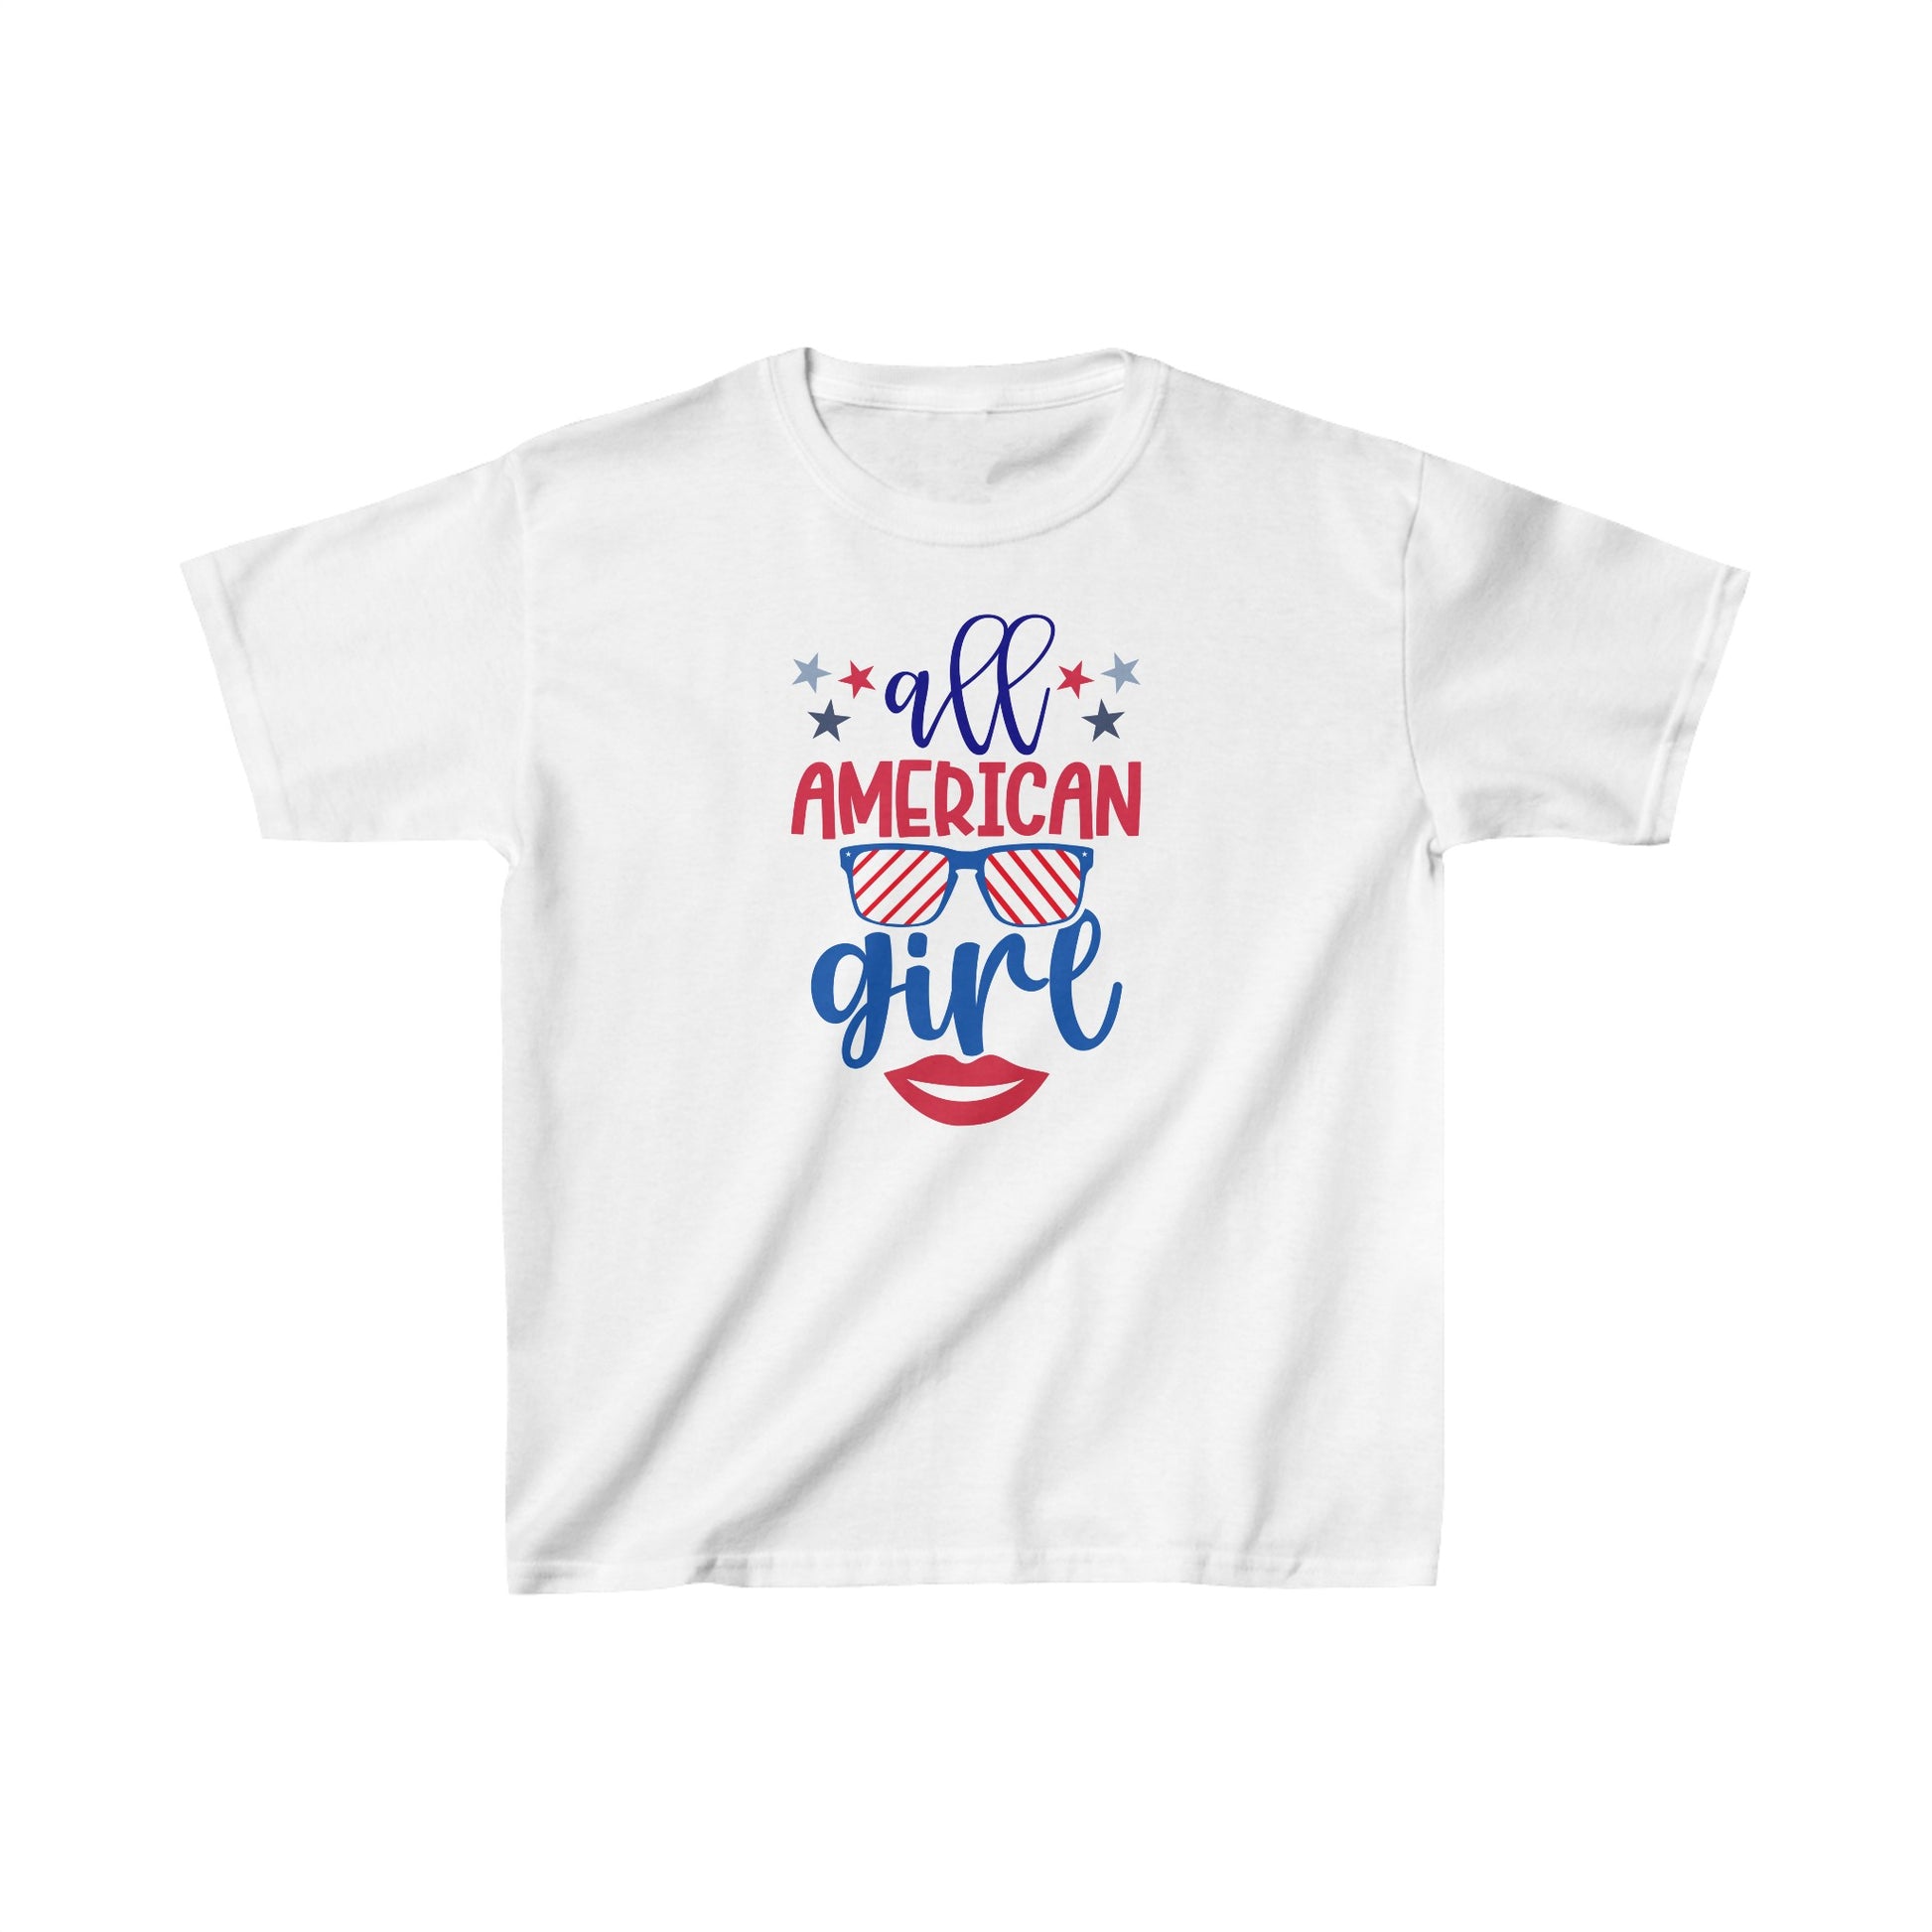 Get trendy with Kids Heavy Cotton™ Tee - Kids clothes available at Good Gift Company. Grab yours for $10.78 today!